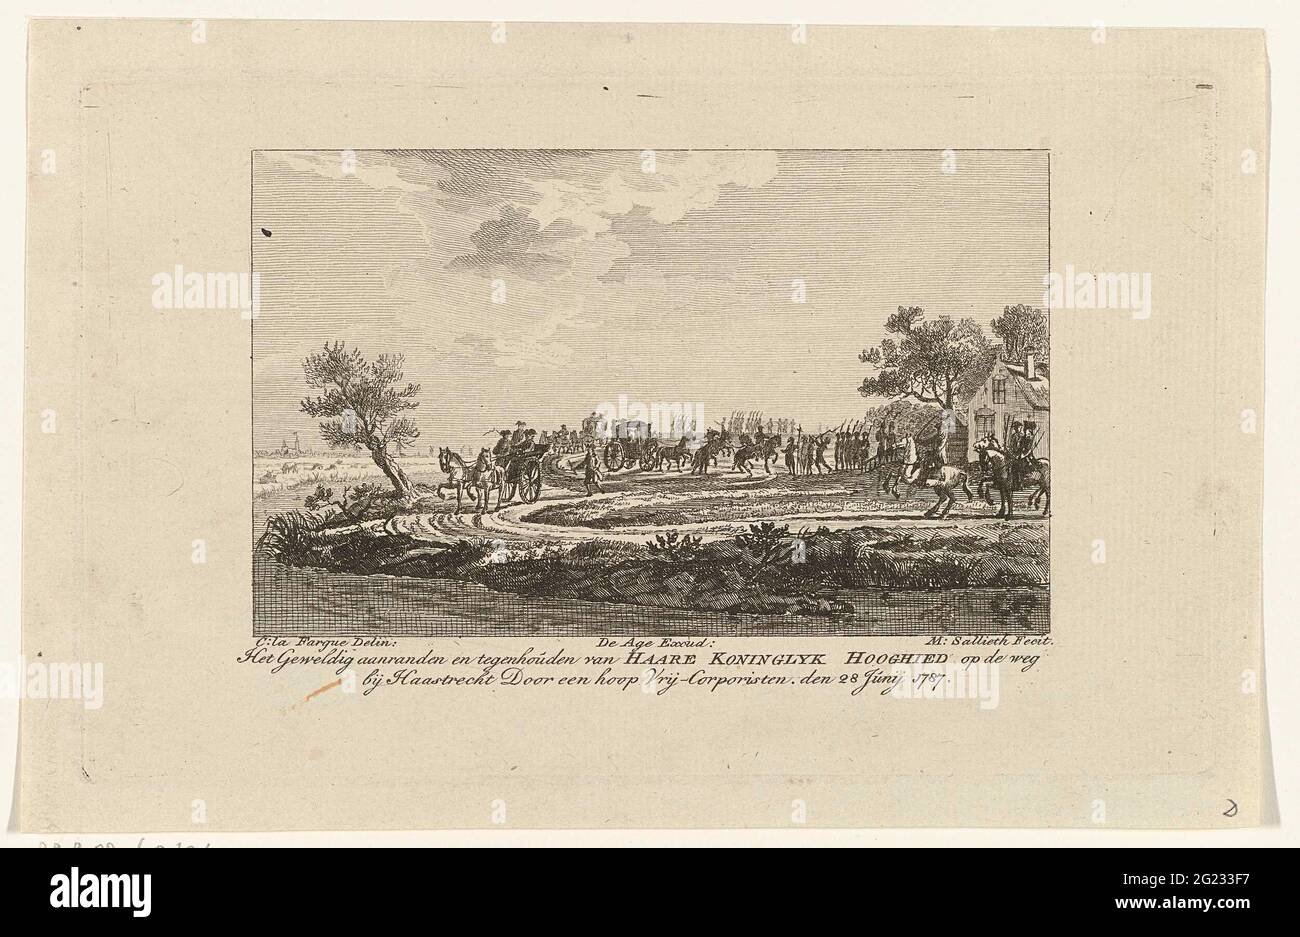 Arrest of the princess at Goejanverwellesluis, 1787; Amazing and stopping Haare Koninglyk Hooghied on the road at Haastrecht through a lot of free corporists. den 28 June 1787. Arresting the procession of carriages with Princess Wilhelmina van Prussian by an exercise joy with Goejanverwellesluis, 28 June 1787. Stock Photo